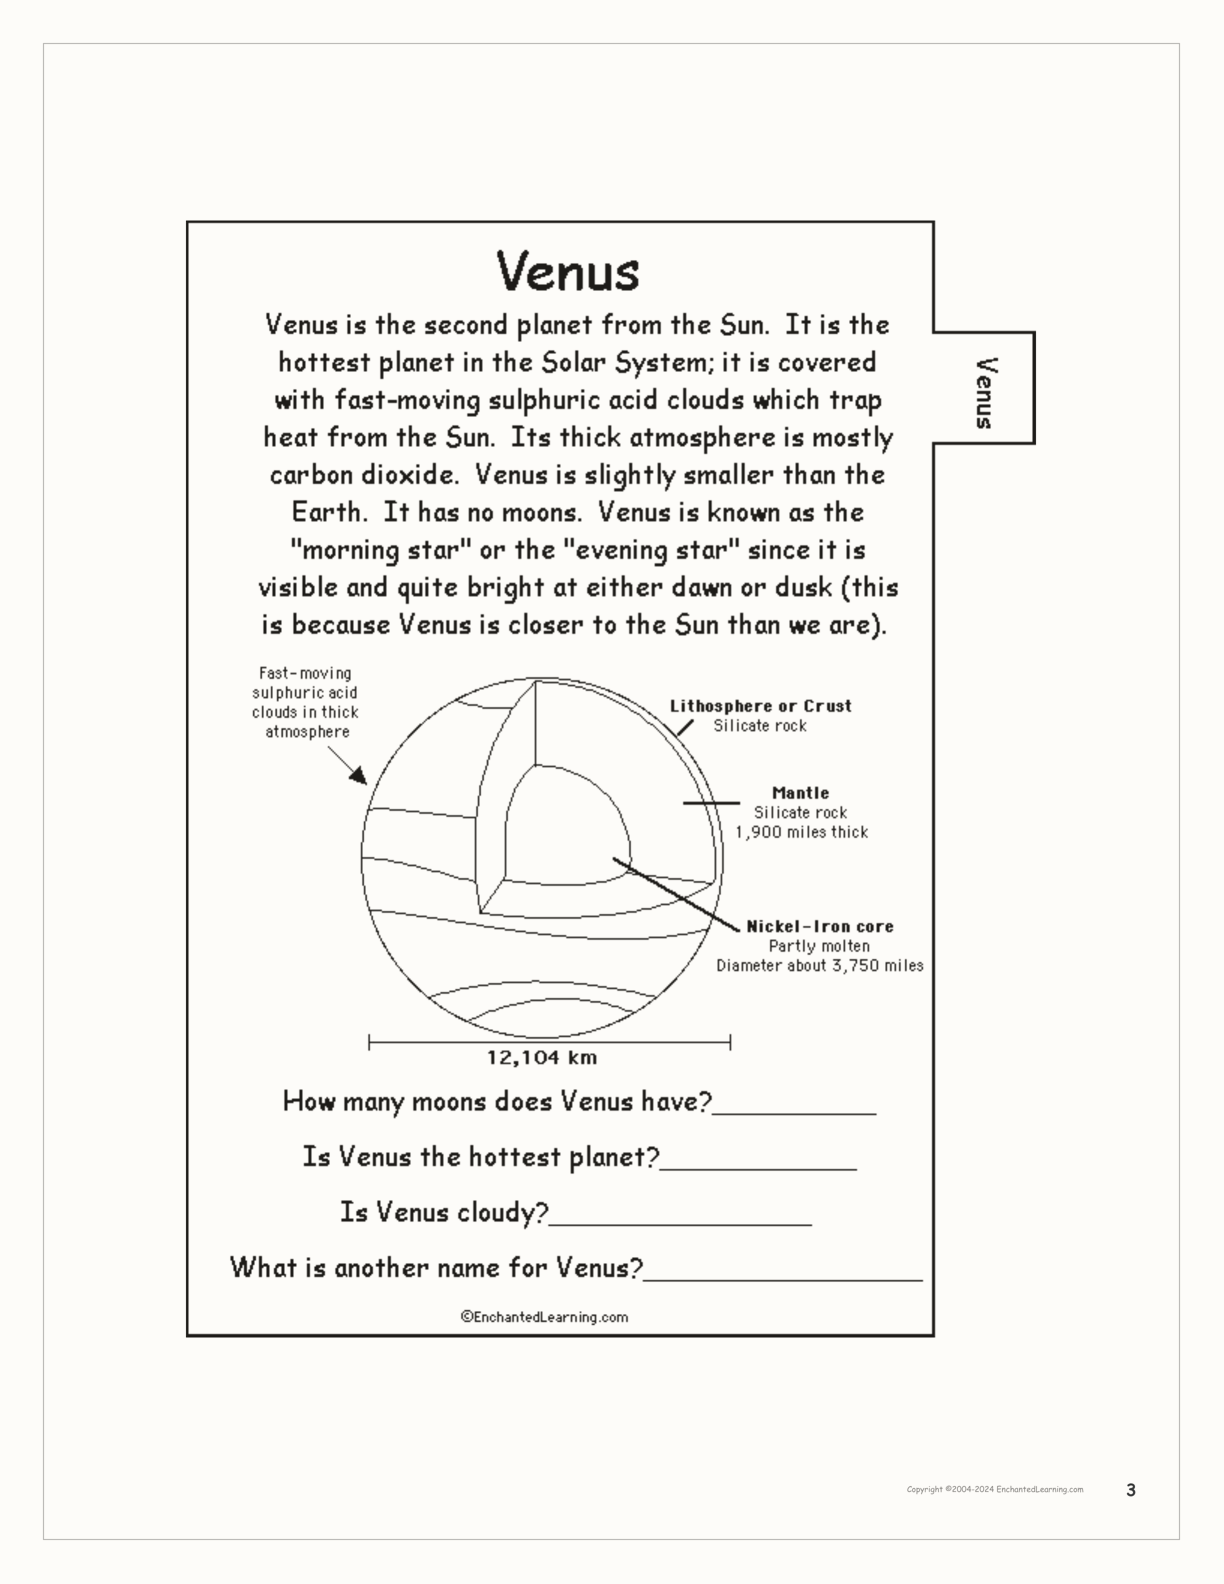 The Planets of our Solar System Book interactive printout page 3